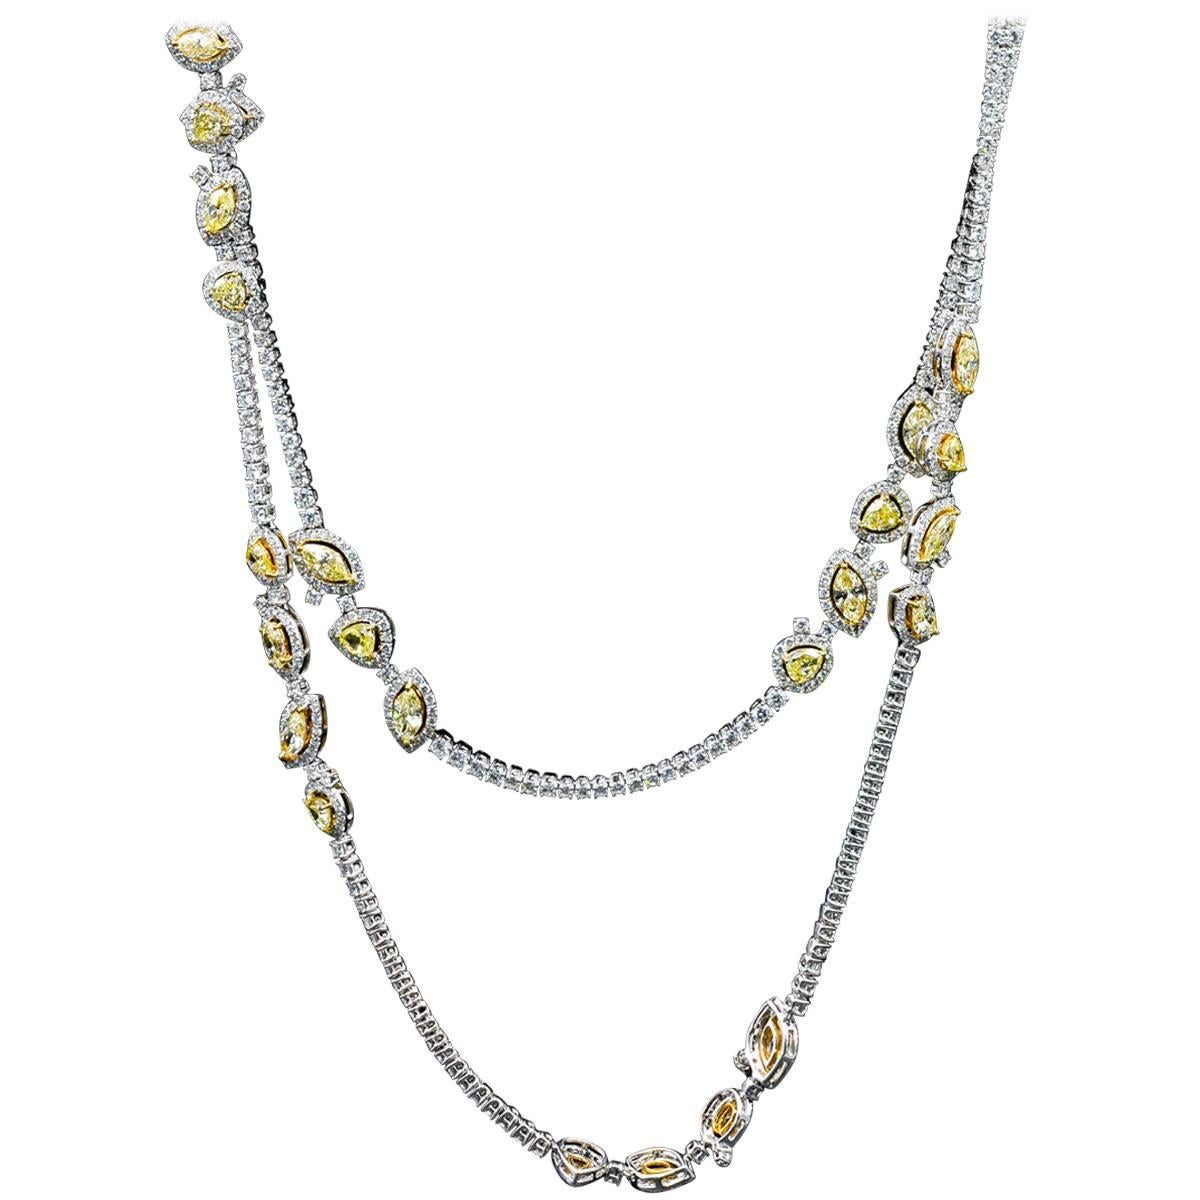 Diamond Riviera Necklace with Yellow Diamond Stations For Sale